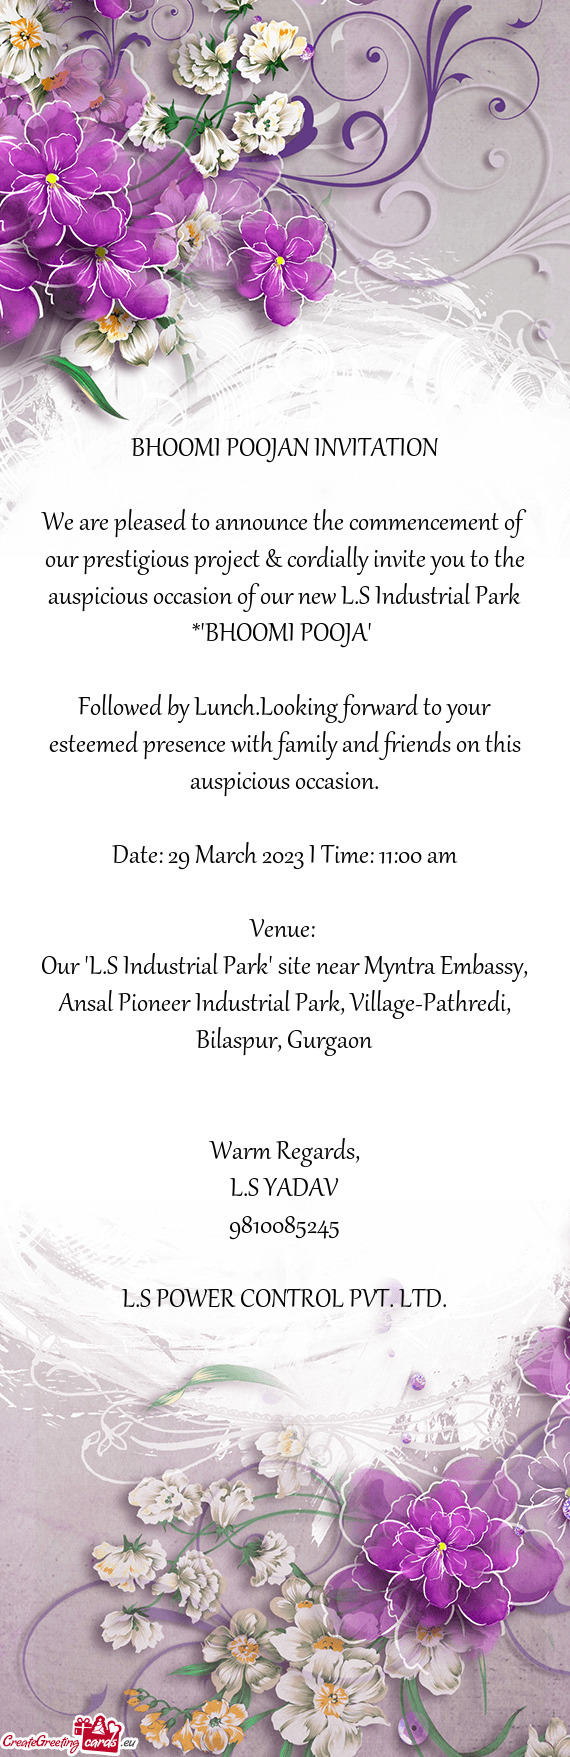 Auspicious occasion of our new L.S Industrial Park *"BHOOMI POOJA"